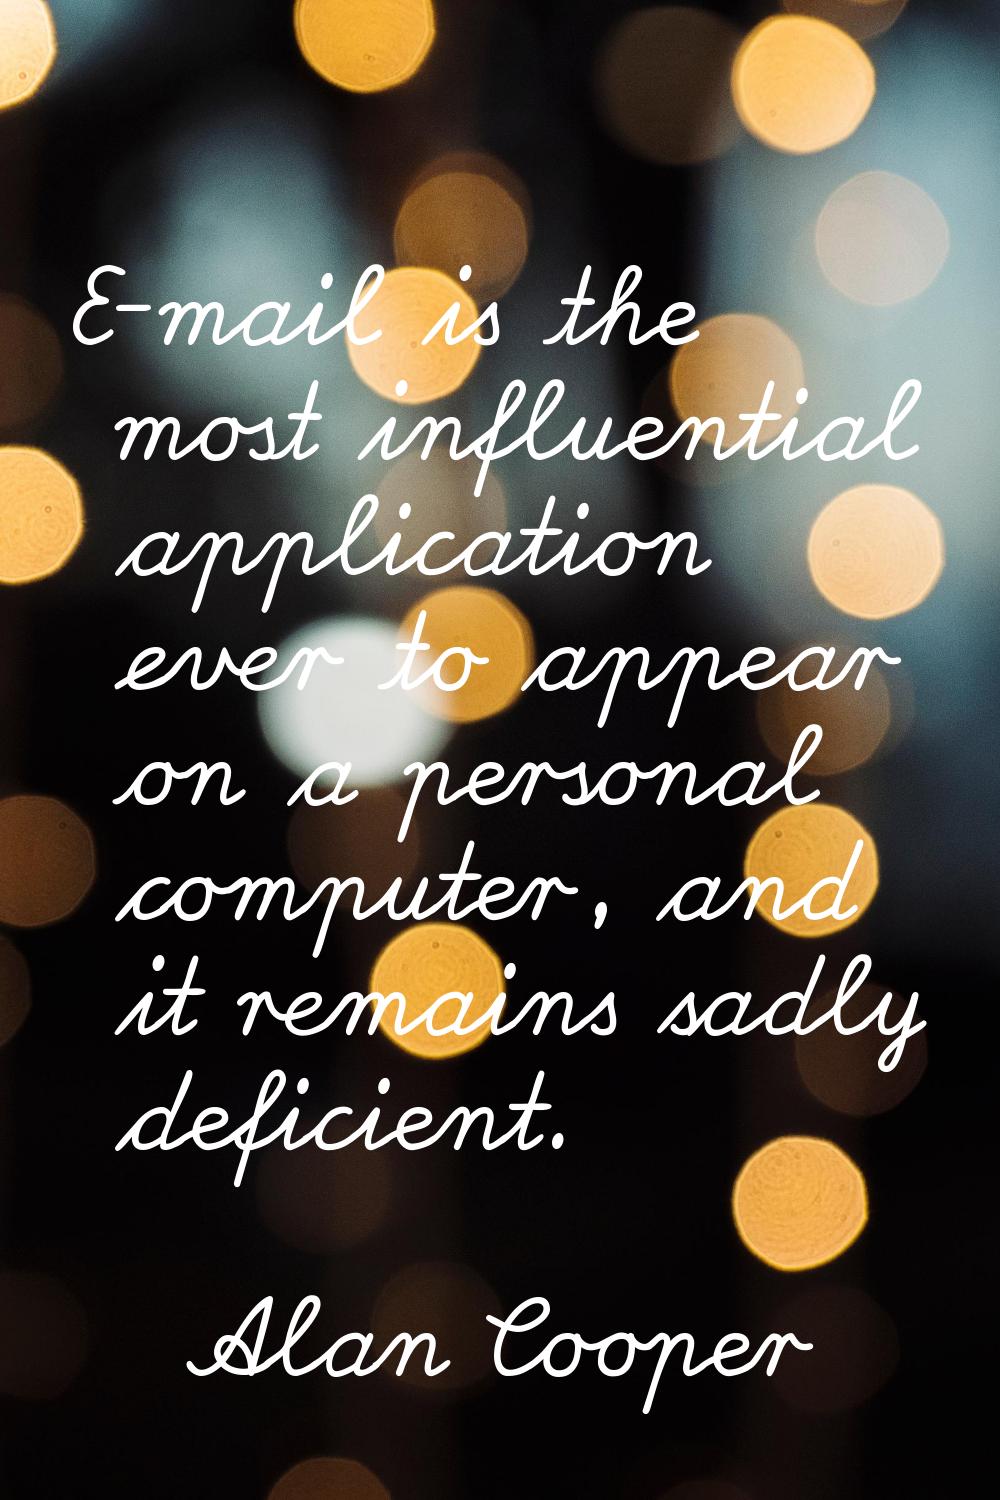 E-mail is the most influential application ever to appear on a personal computer, and it remains sa